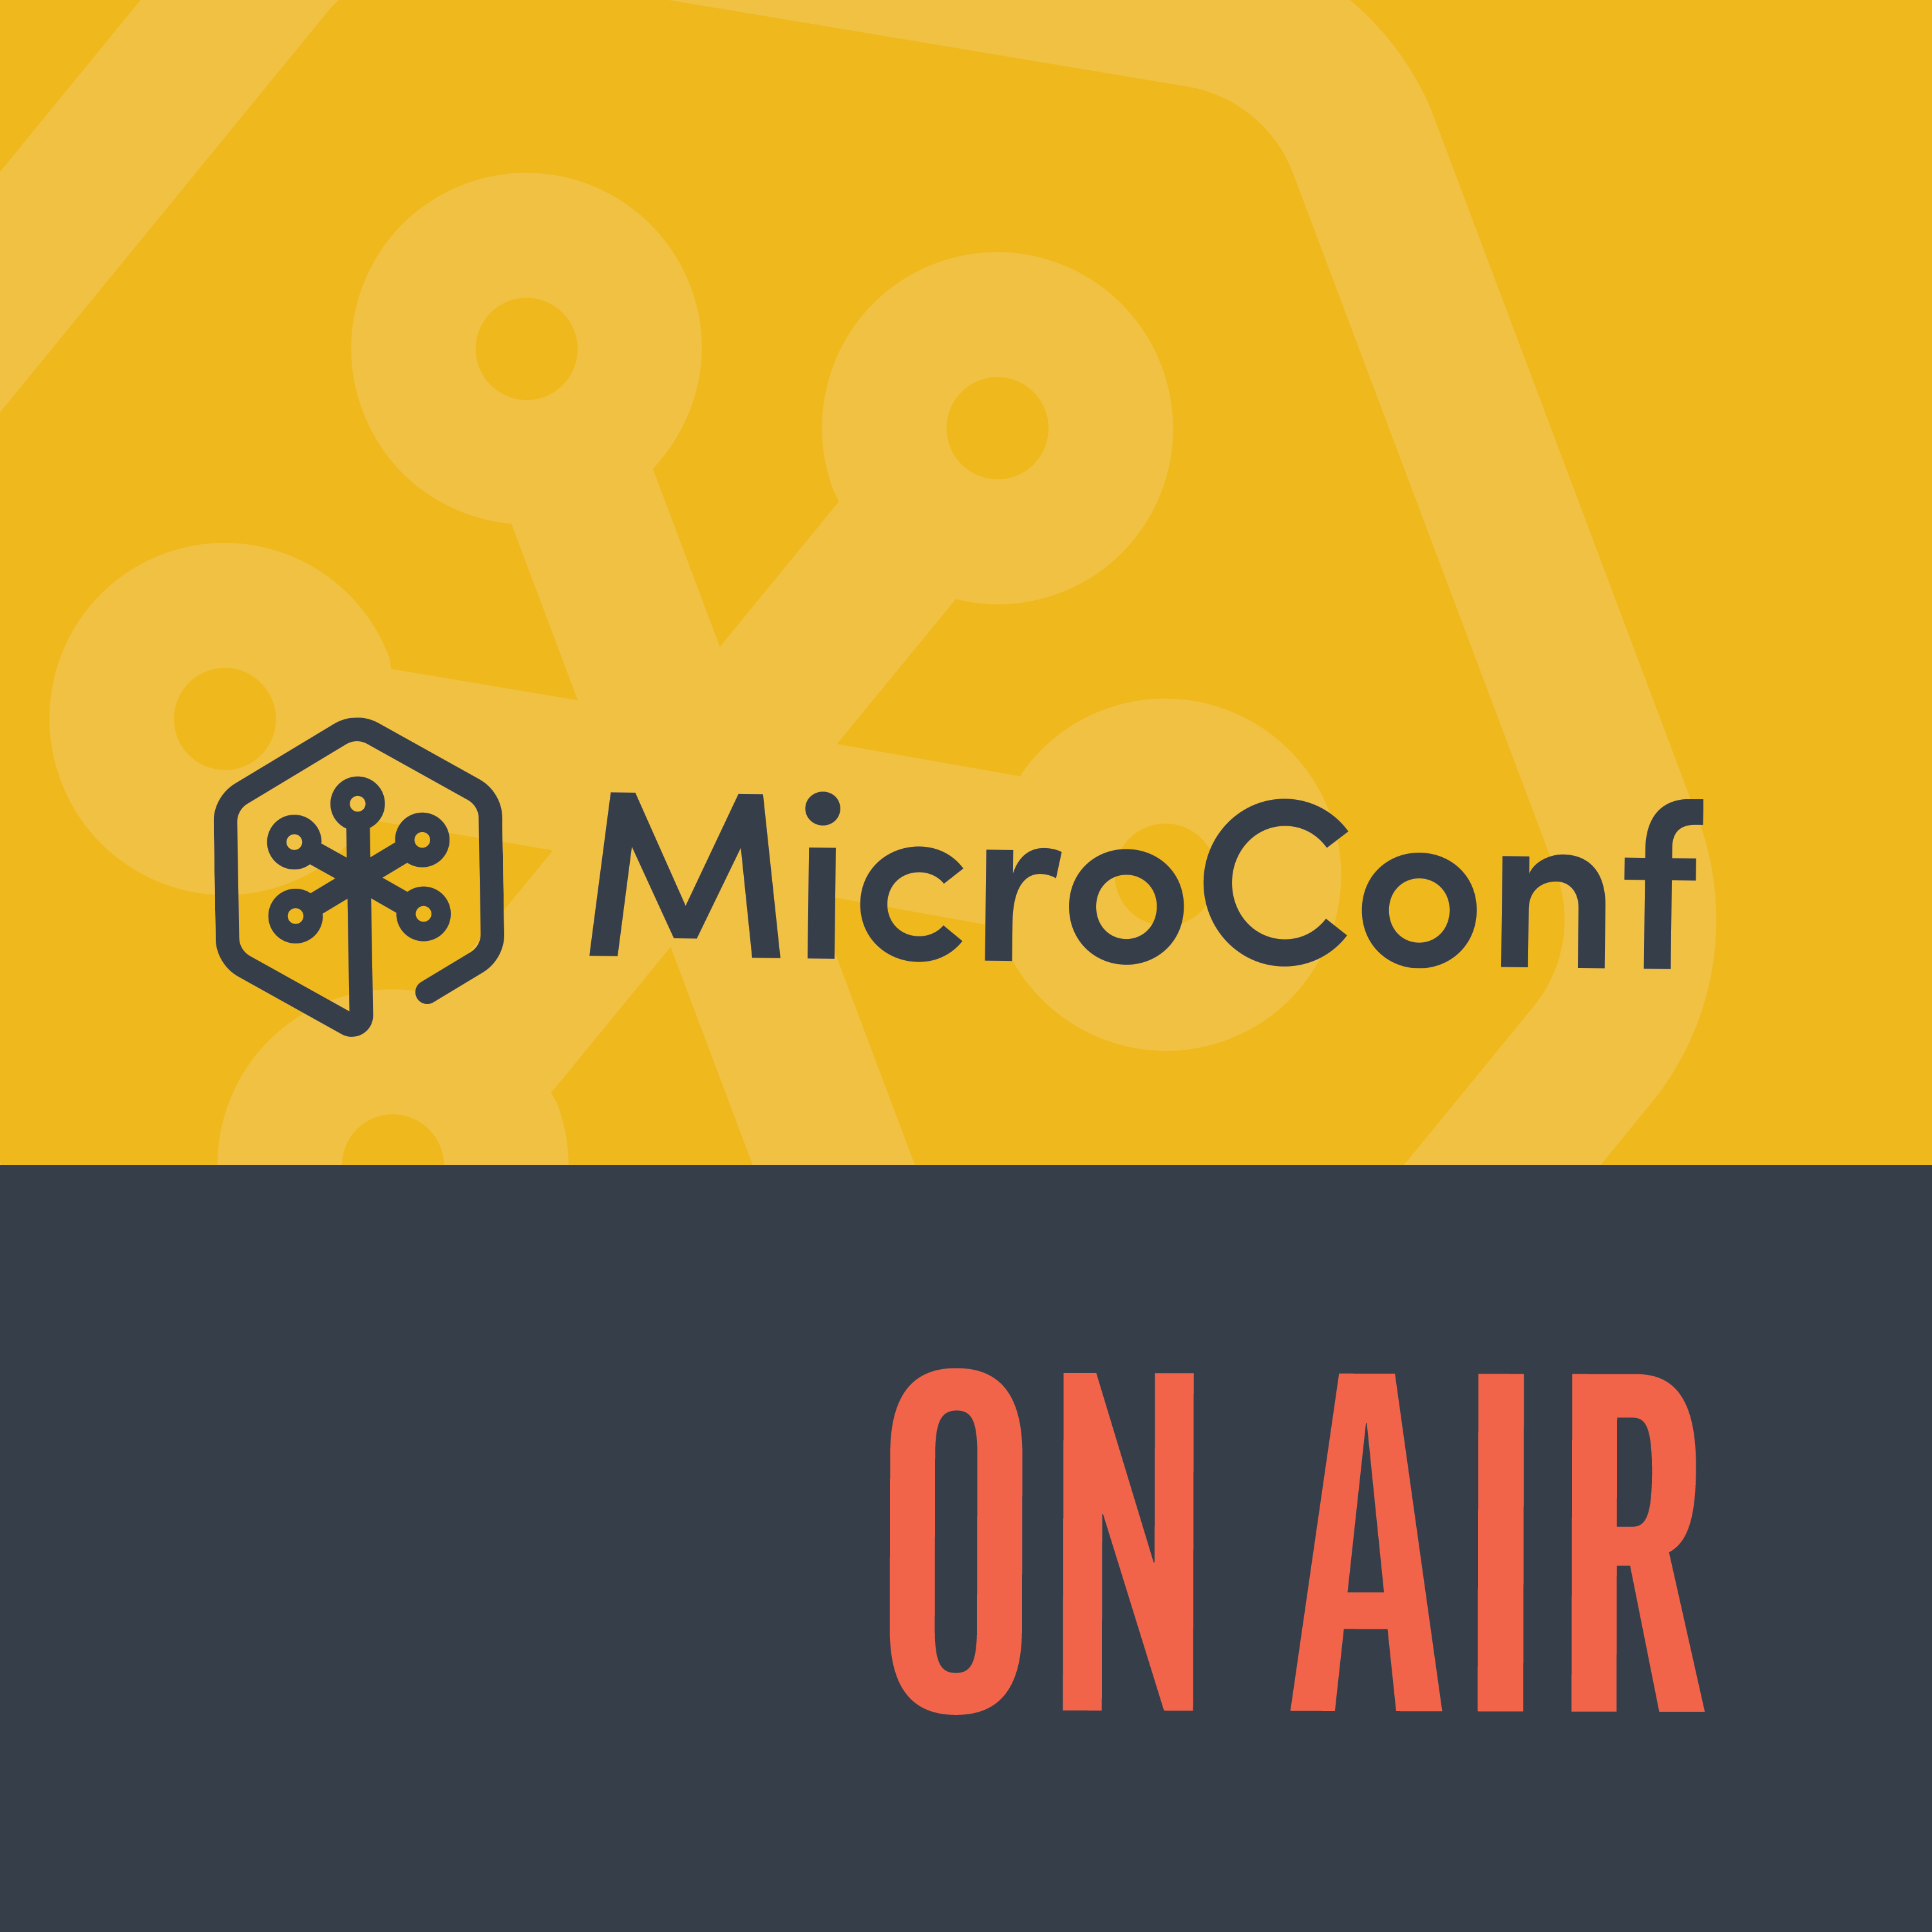 MicroConf On Air: The Habits of Successful Entrepreneurs with Sherry Walling